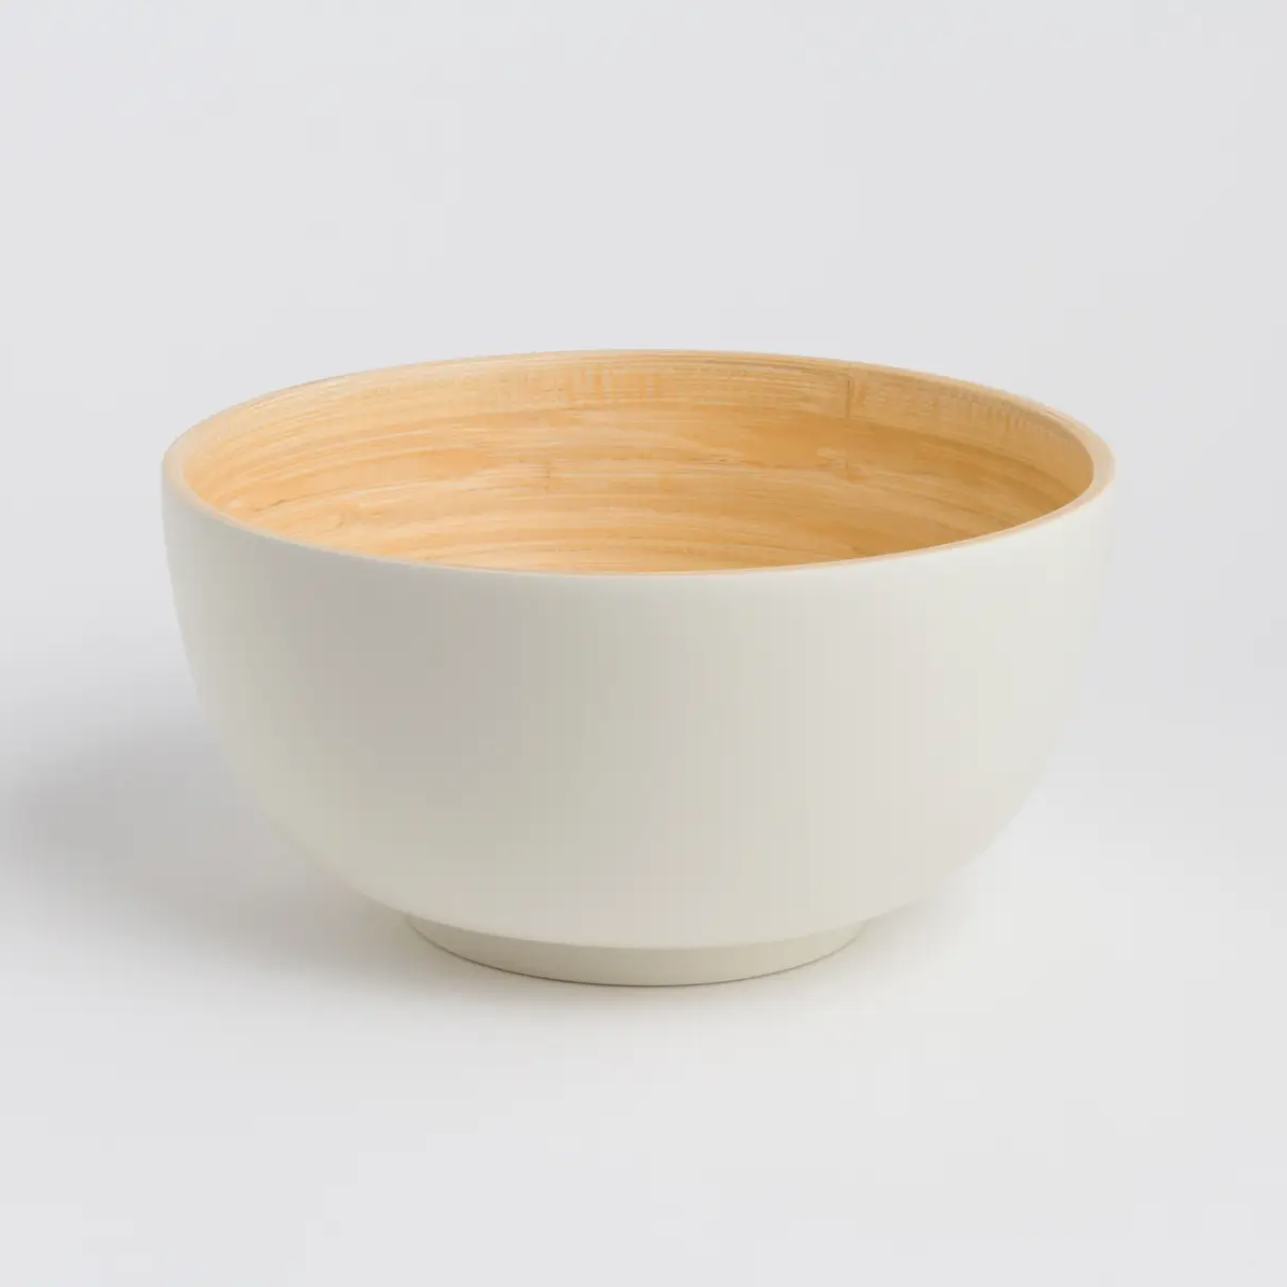 Bamboo Serving Bowl in Matte Finish, Large